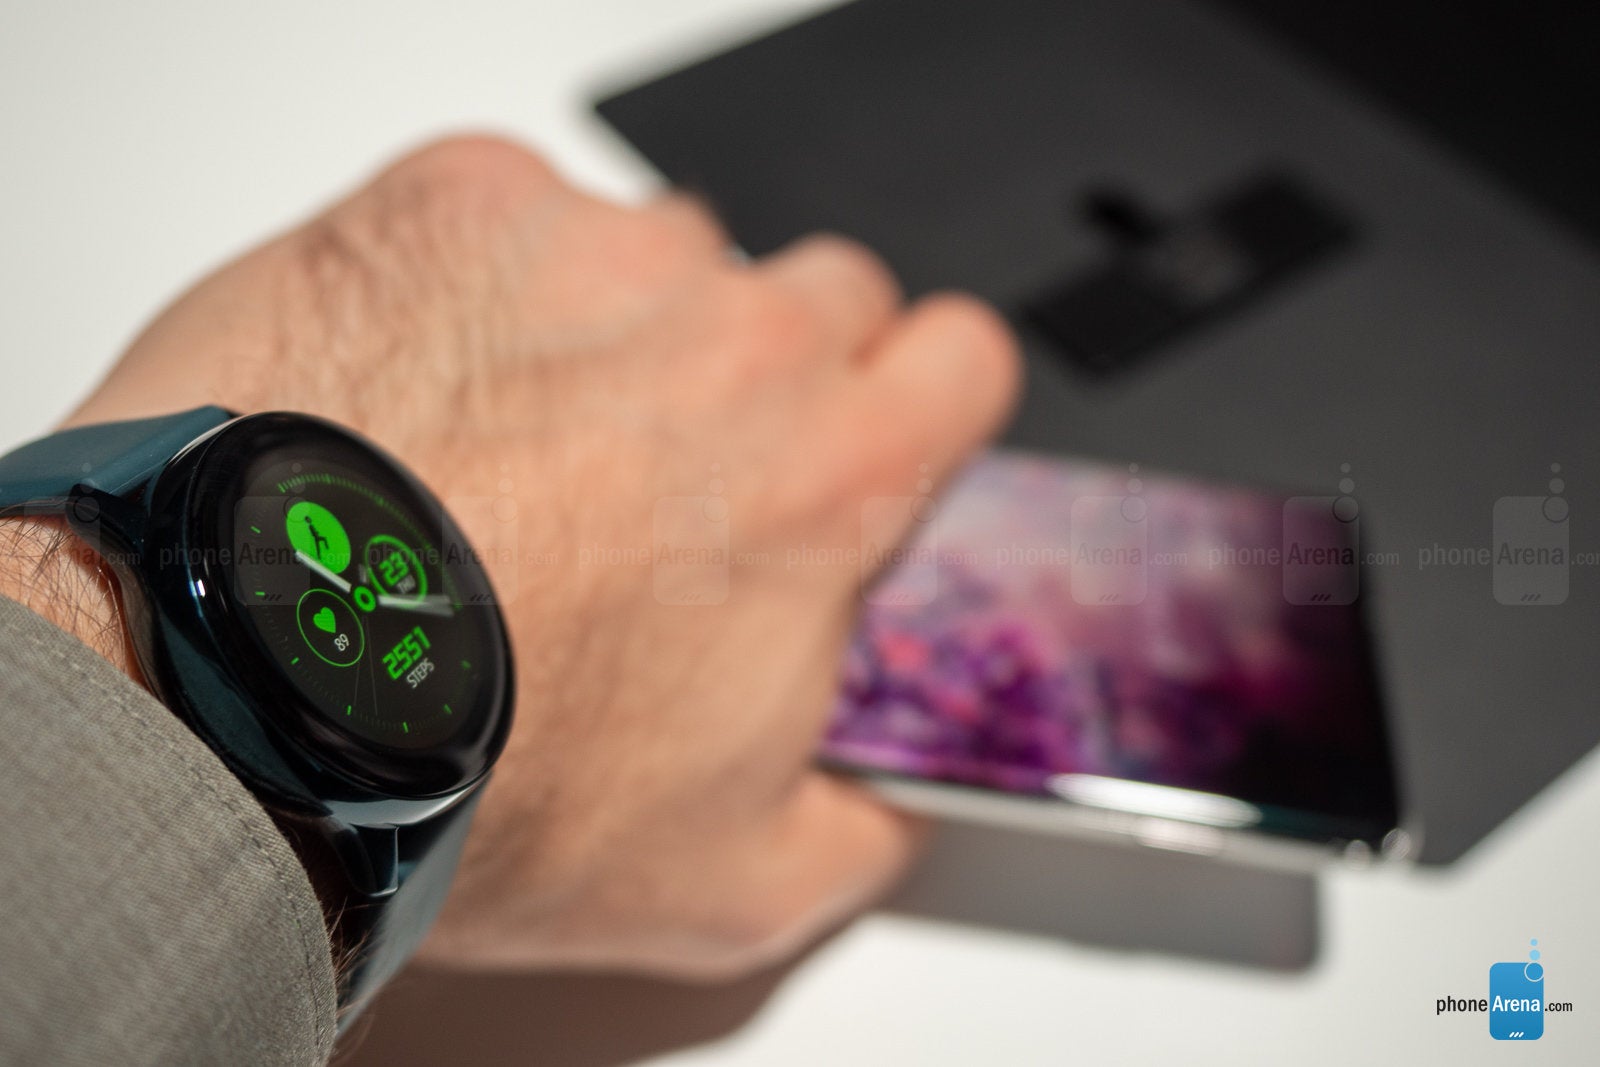 Samsung Galaxy Watch Active hands-on: compact, stylish, functional, and affordable